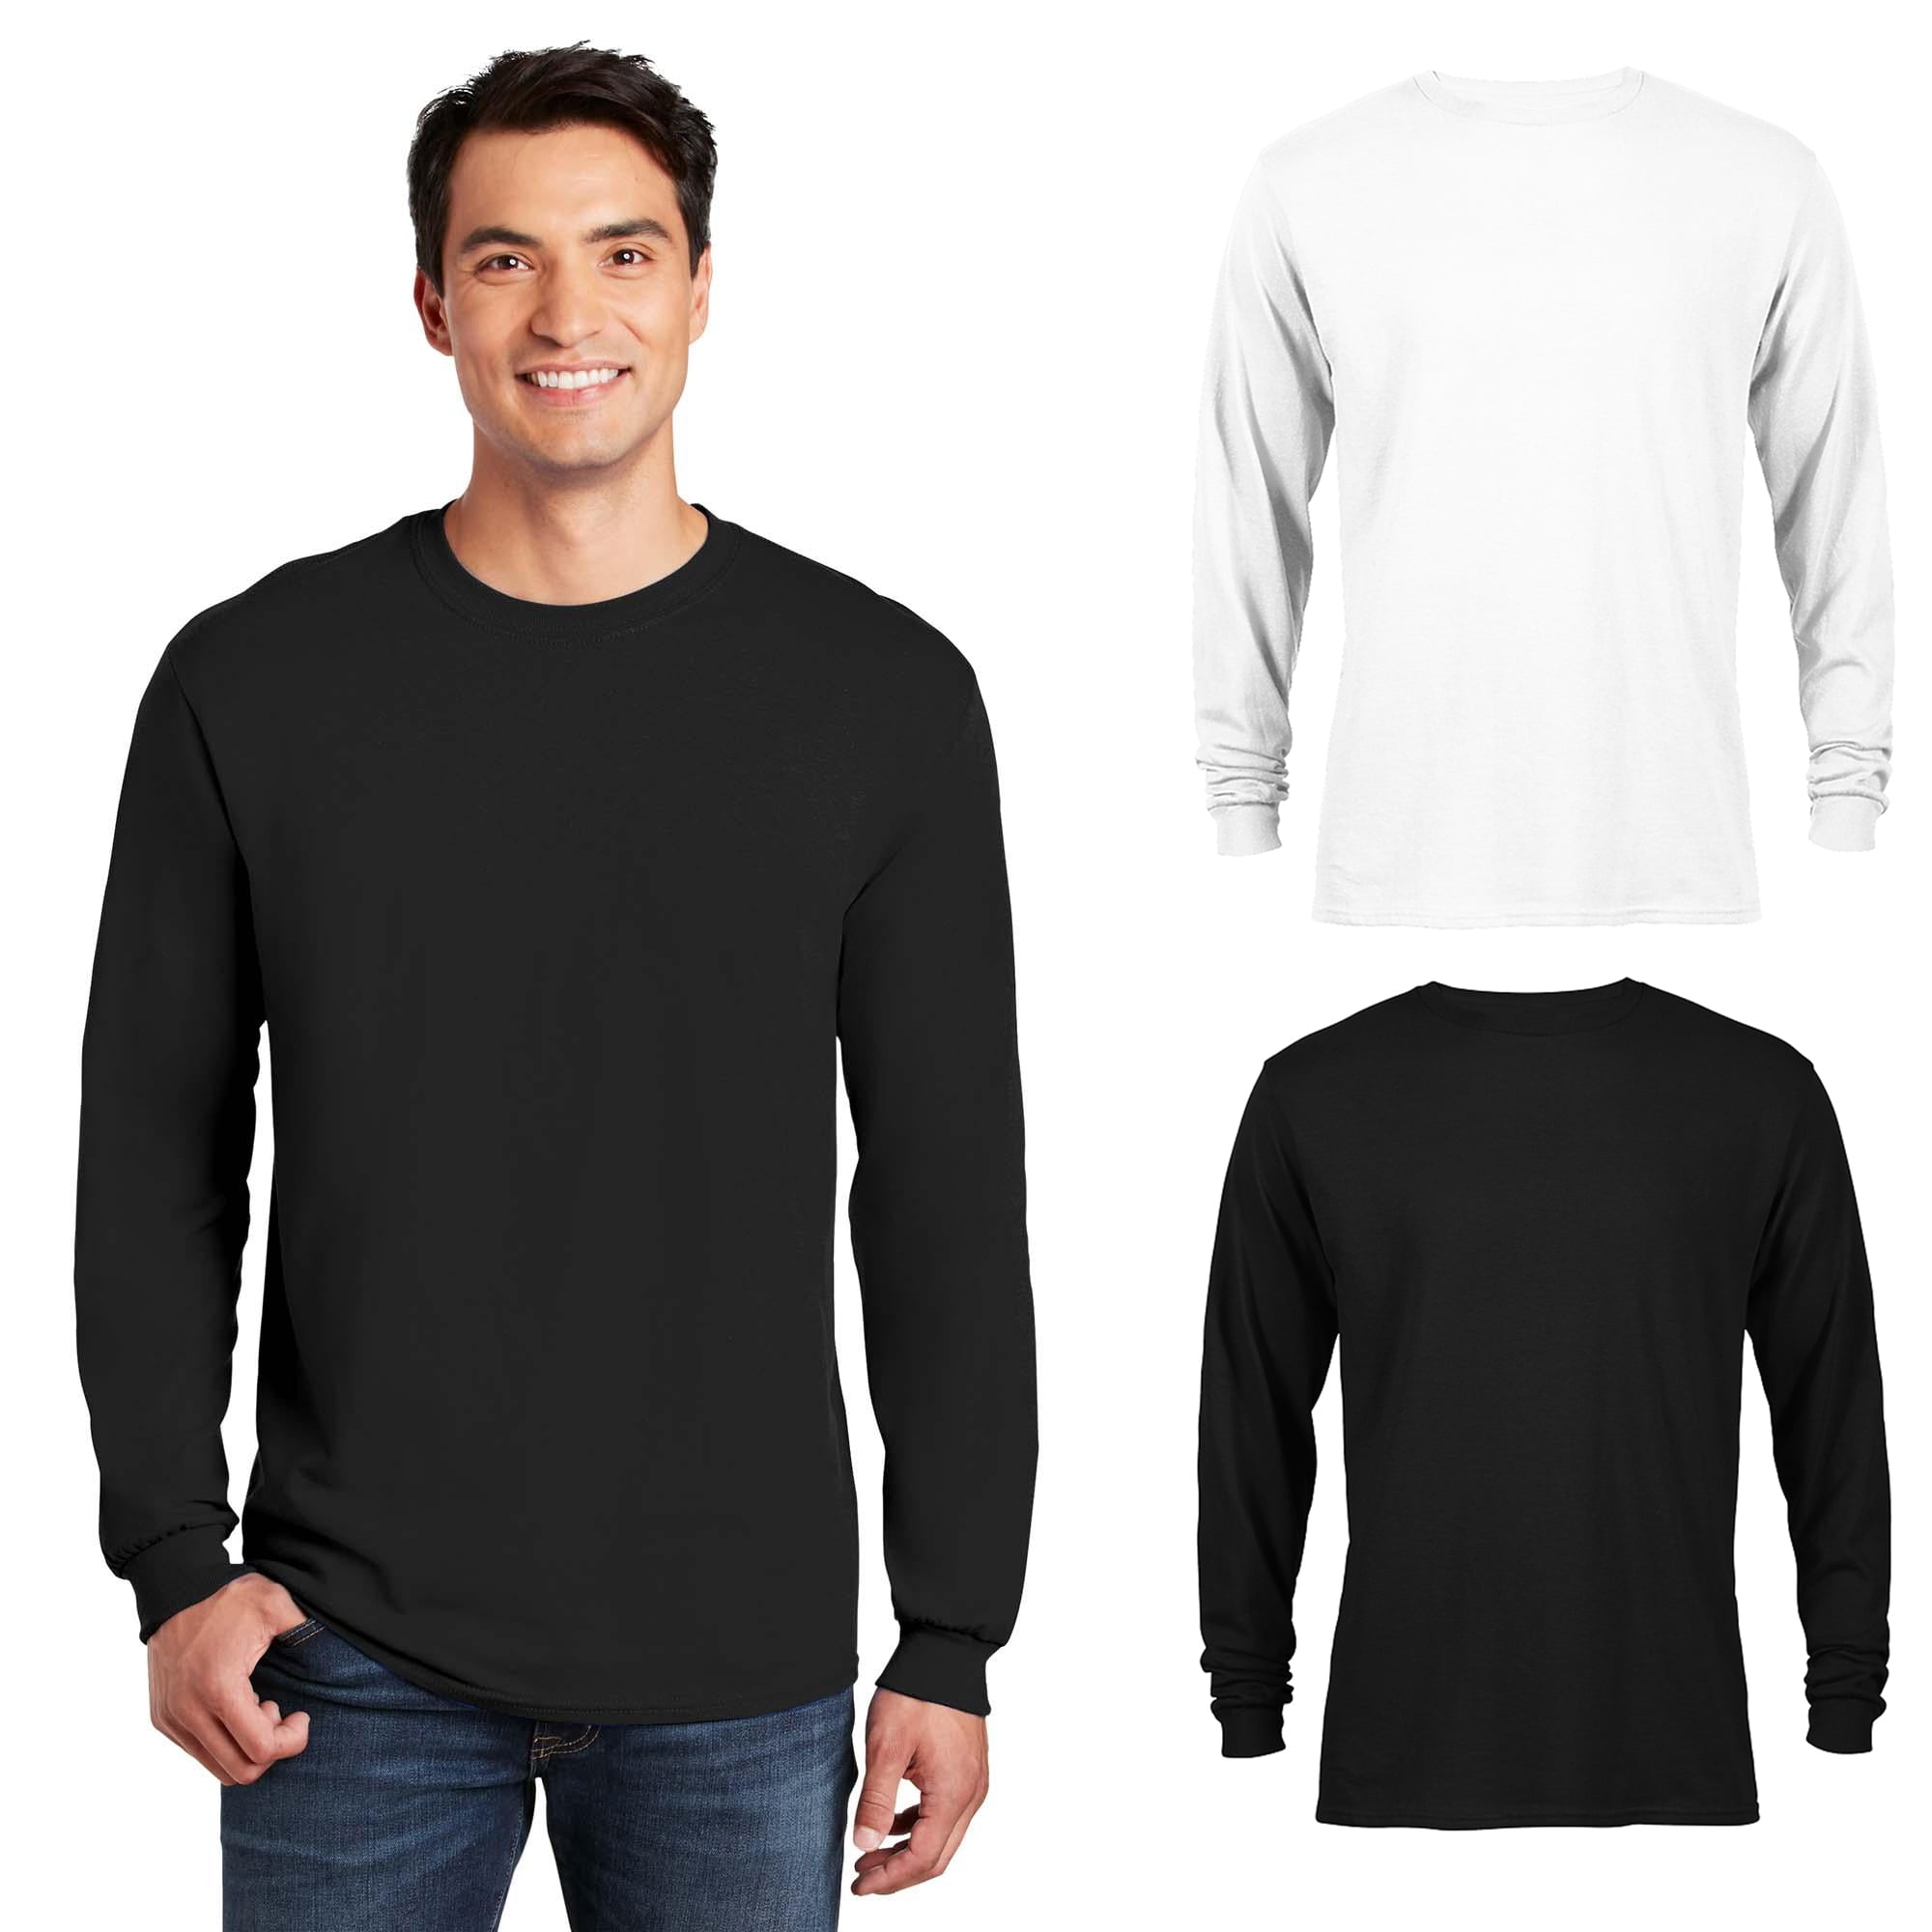 Long-Sleeve T-Shirts - Value Black T-Shirts - White T-Shirts - Mens plain  tee - Radyan Minimalist Cotton Casual Classic Solid color tees - Affordable  round neck Minimalist T-shirt. 